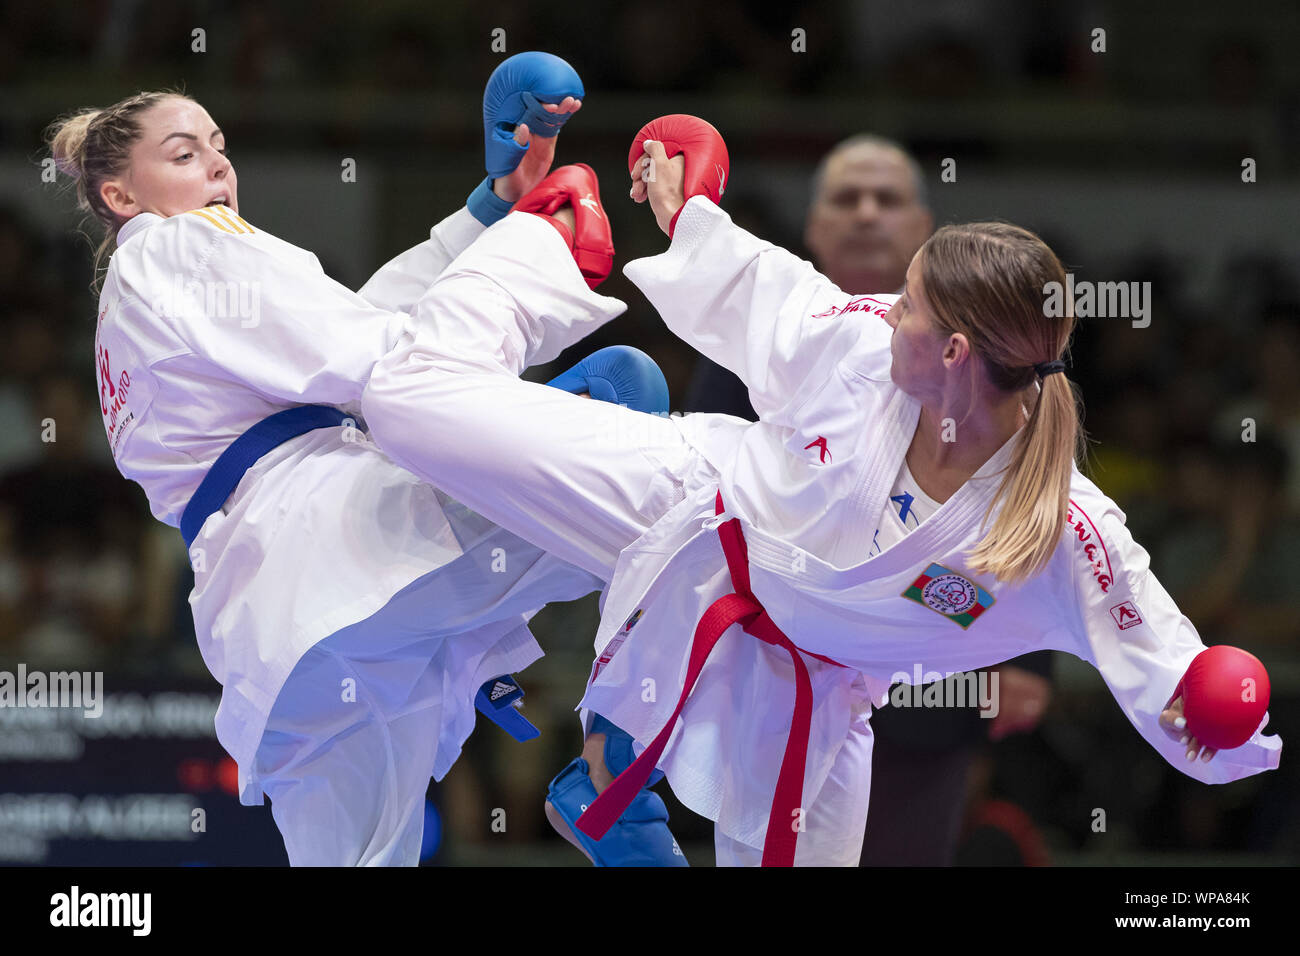 Tokyo, Japan. 8th Sep, 2019. Irina Zaretska of Azerbaijan (red) fights against Alizee Agier of France (blue) for the gold medal of the Female Kumite's -68 kg category at the Karate1 Premier League Tokyo 2019. The Karate1 Premier League is held from September 6 to 8 at the Nippon Budokan. The Karate will make its debut appearance at the Tokyo 2020 Summer Olympic Games. Irina Zaretska won the gold. Credit: Rodrigo Reyes Marin/ZUMA Wire/Alamy Live News Stock Photo